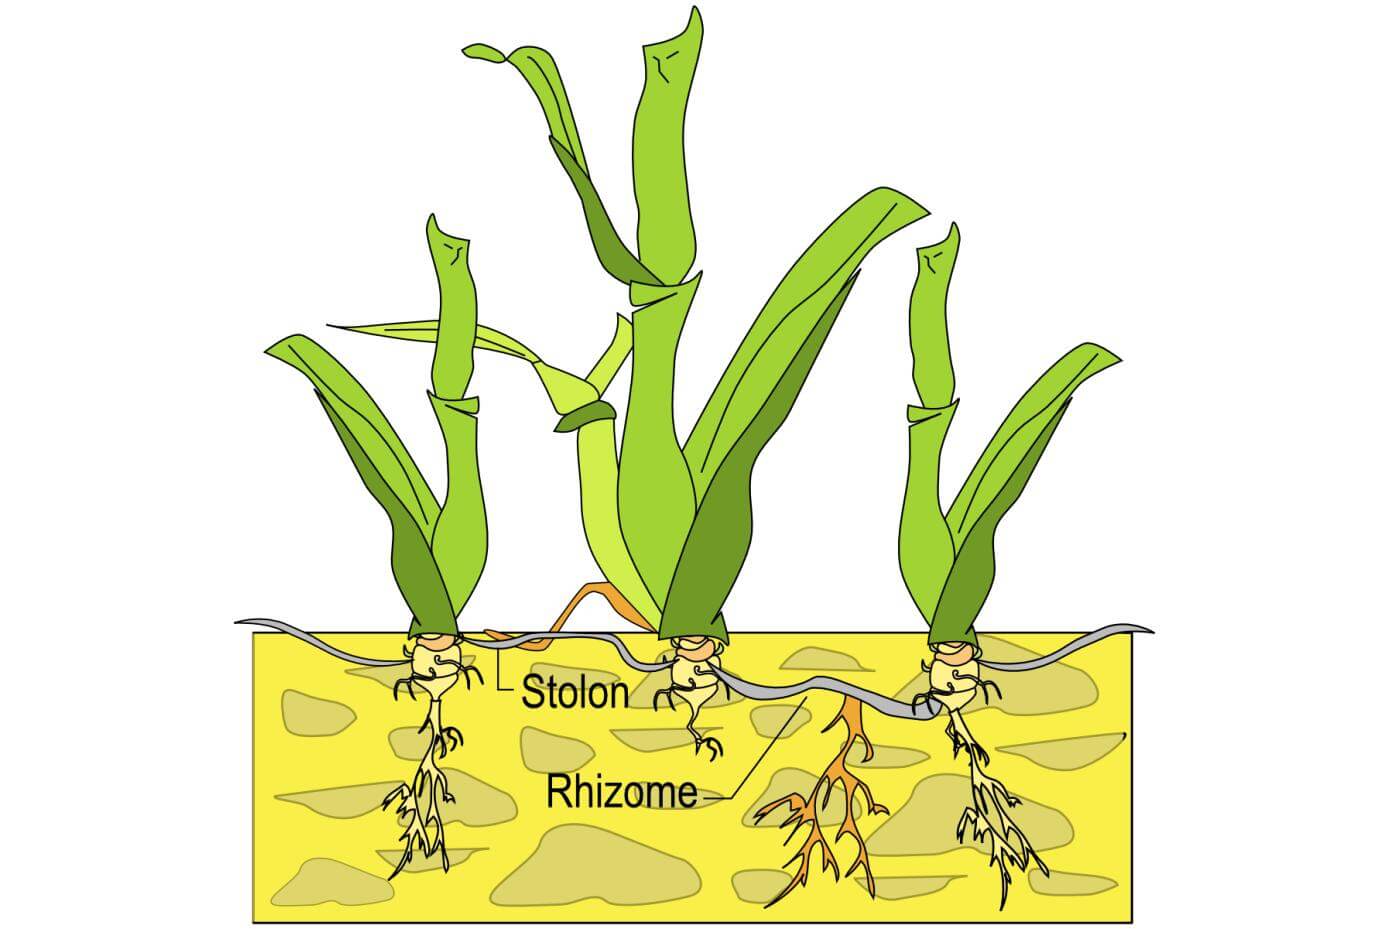 Illustration showing a rhizome and stolon growing from the base of a grass plant and producing other grass plants.